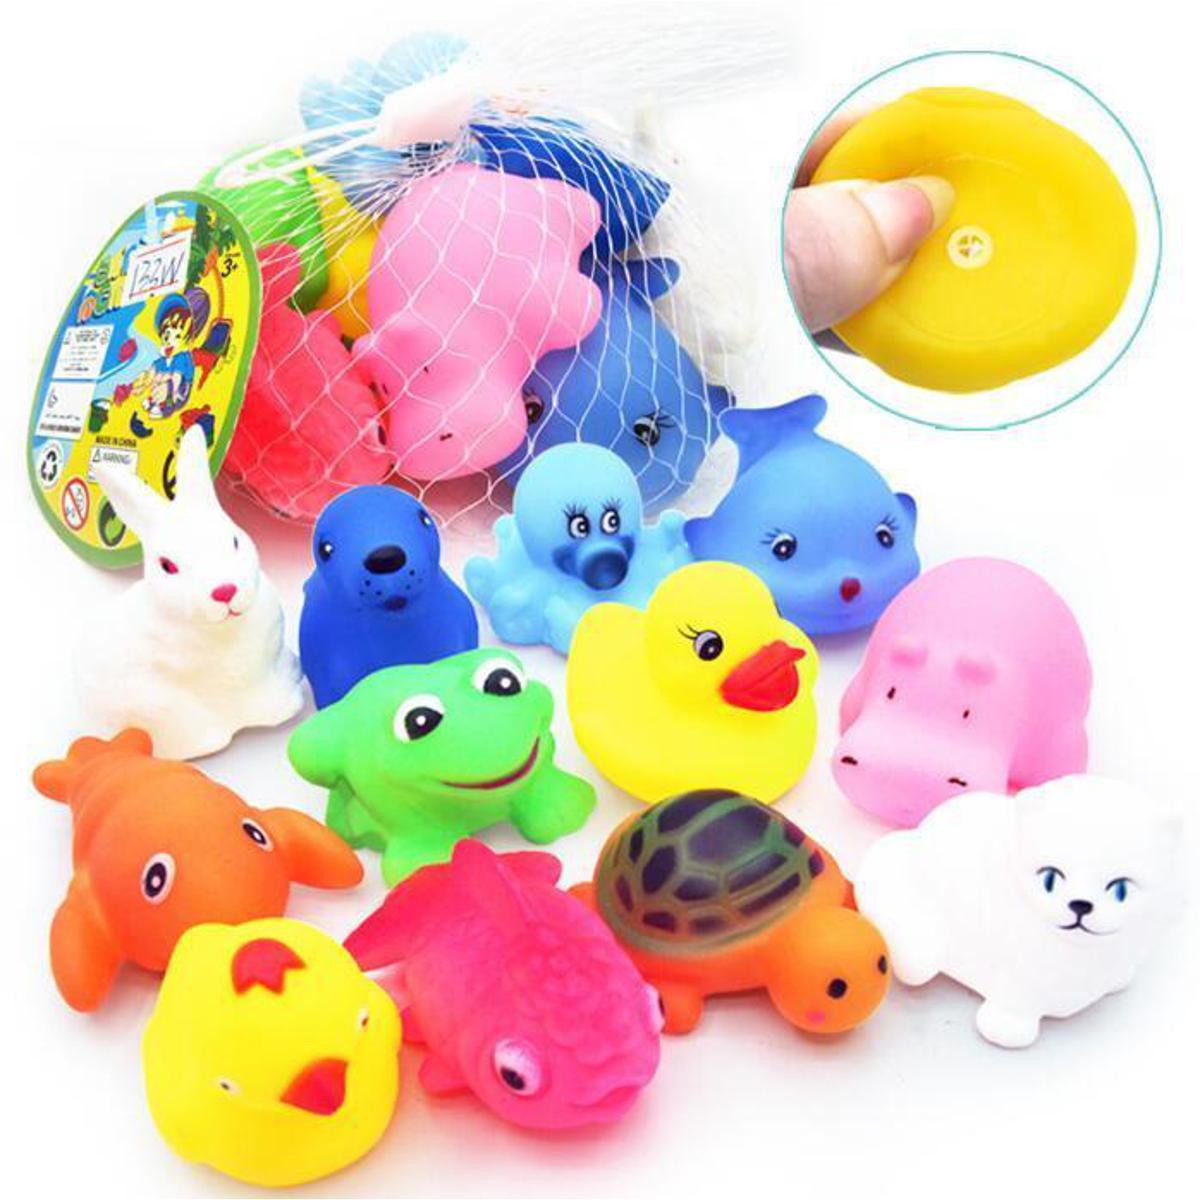 Soft Rubber Float Sqeeze Sound Baby Wash Bath Play Animals Toys -6 pis